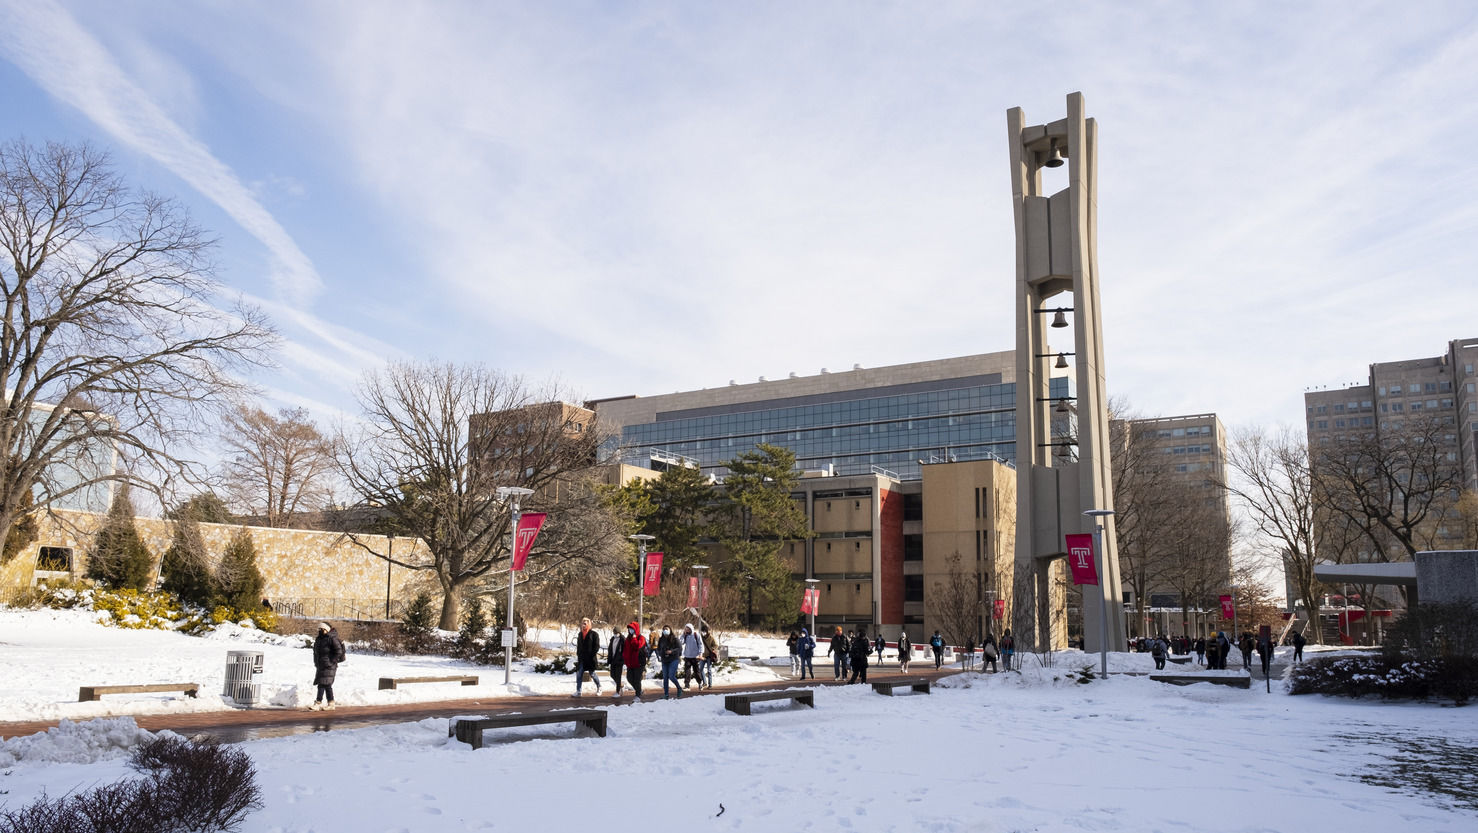  Students walking outside in the snow near the Bell Tower.